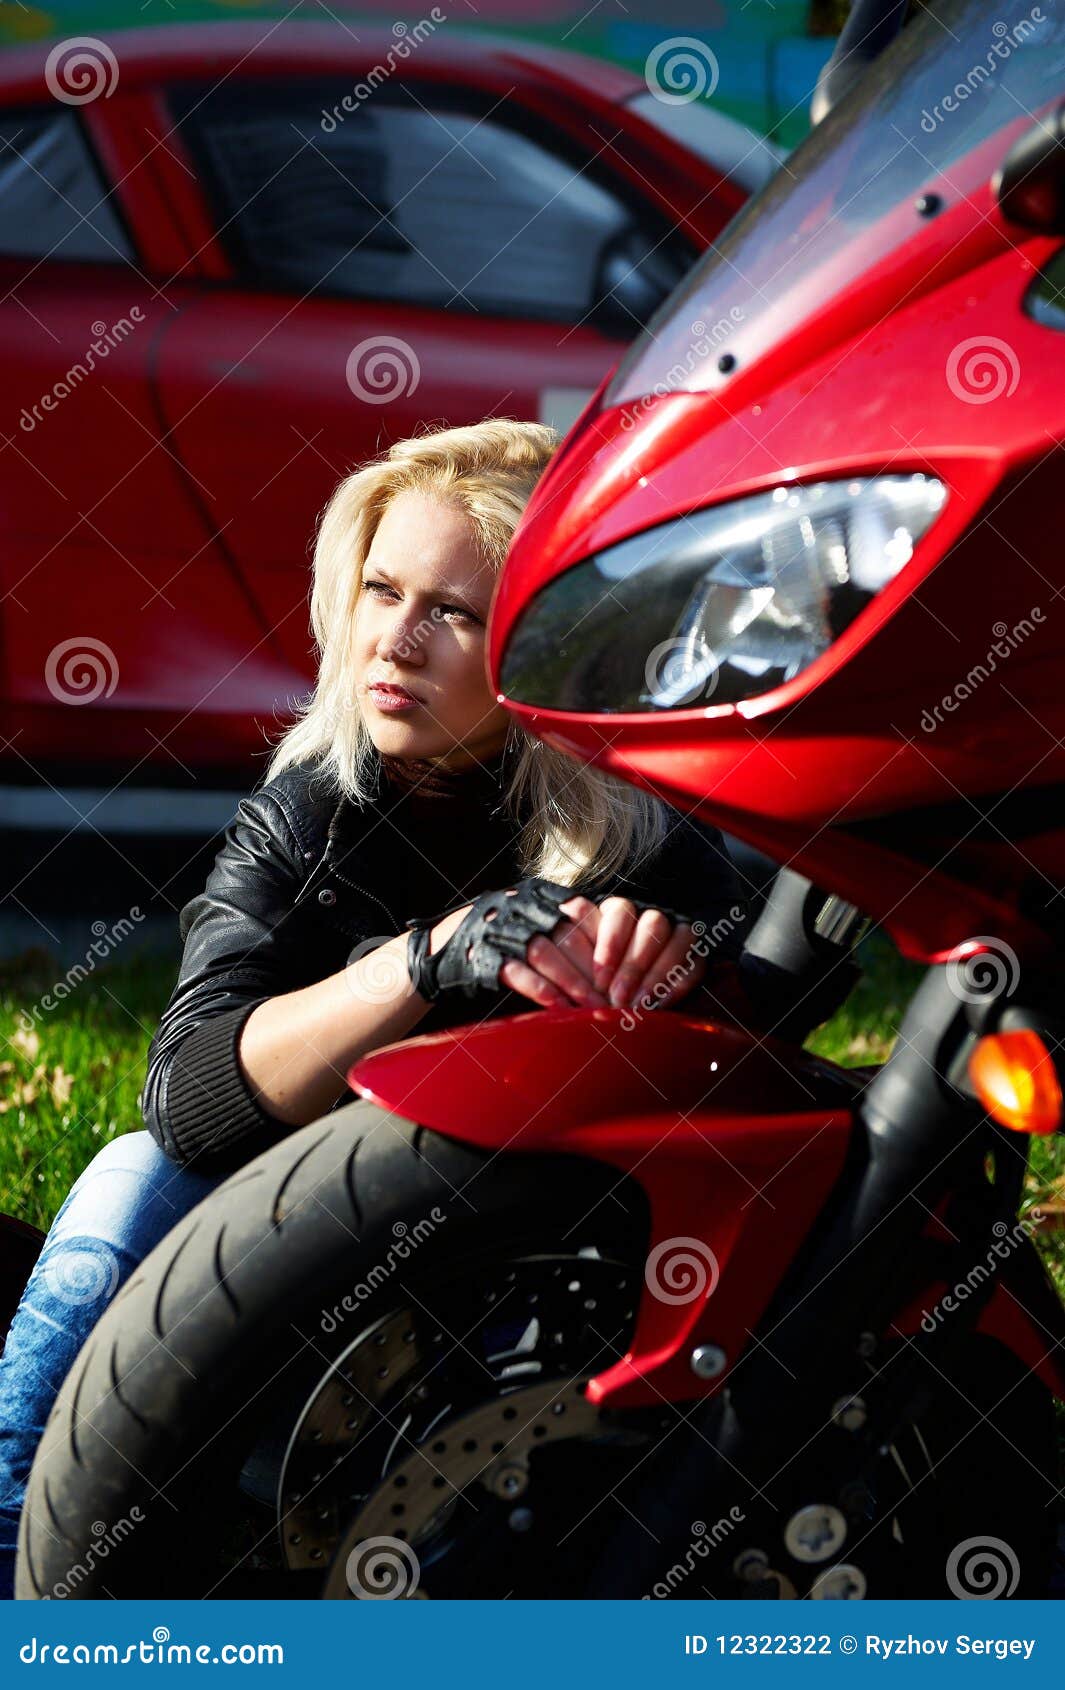 Blonde and red motorcycle stock photo. Image of romantic - 12322322